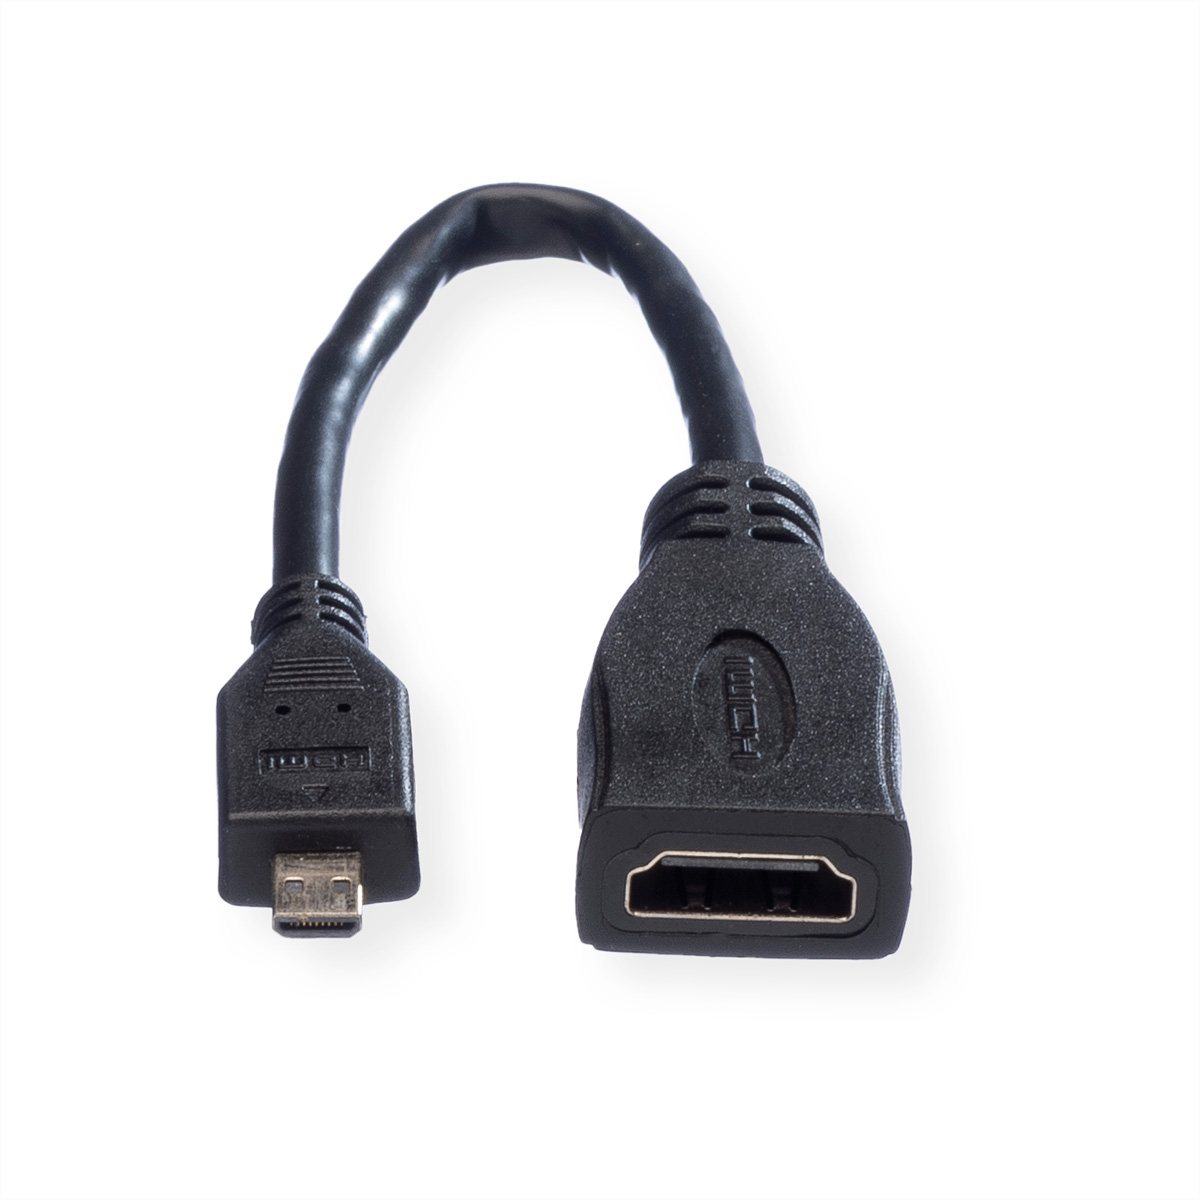 VALUE HDMI High Speed Kabel BU High with ST - mit HDMI Micro Kabel Speed Ethernet Micro Ethernet, HDMI HDMI